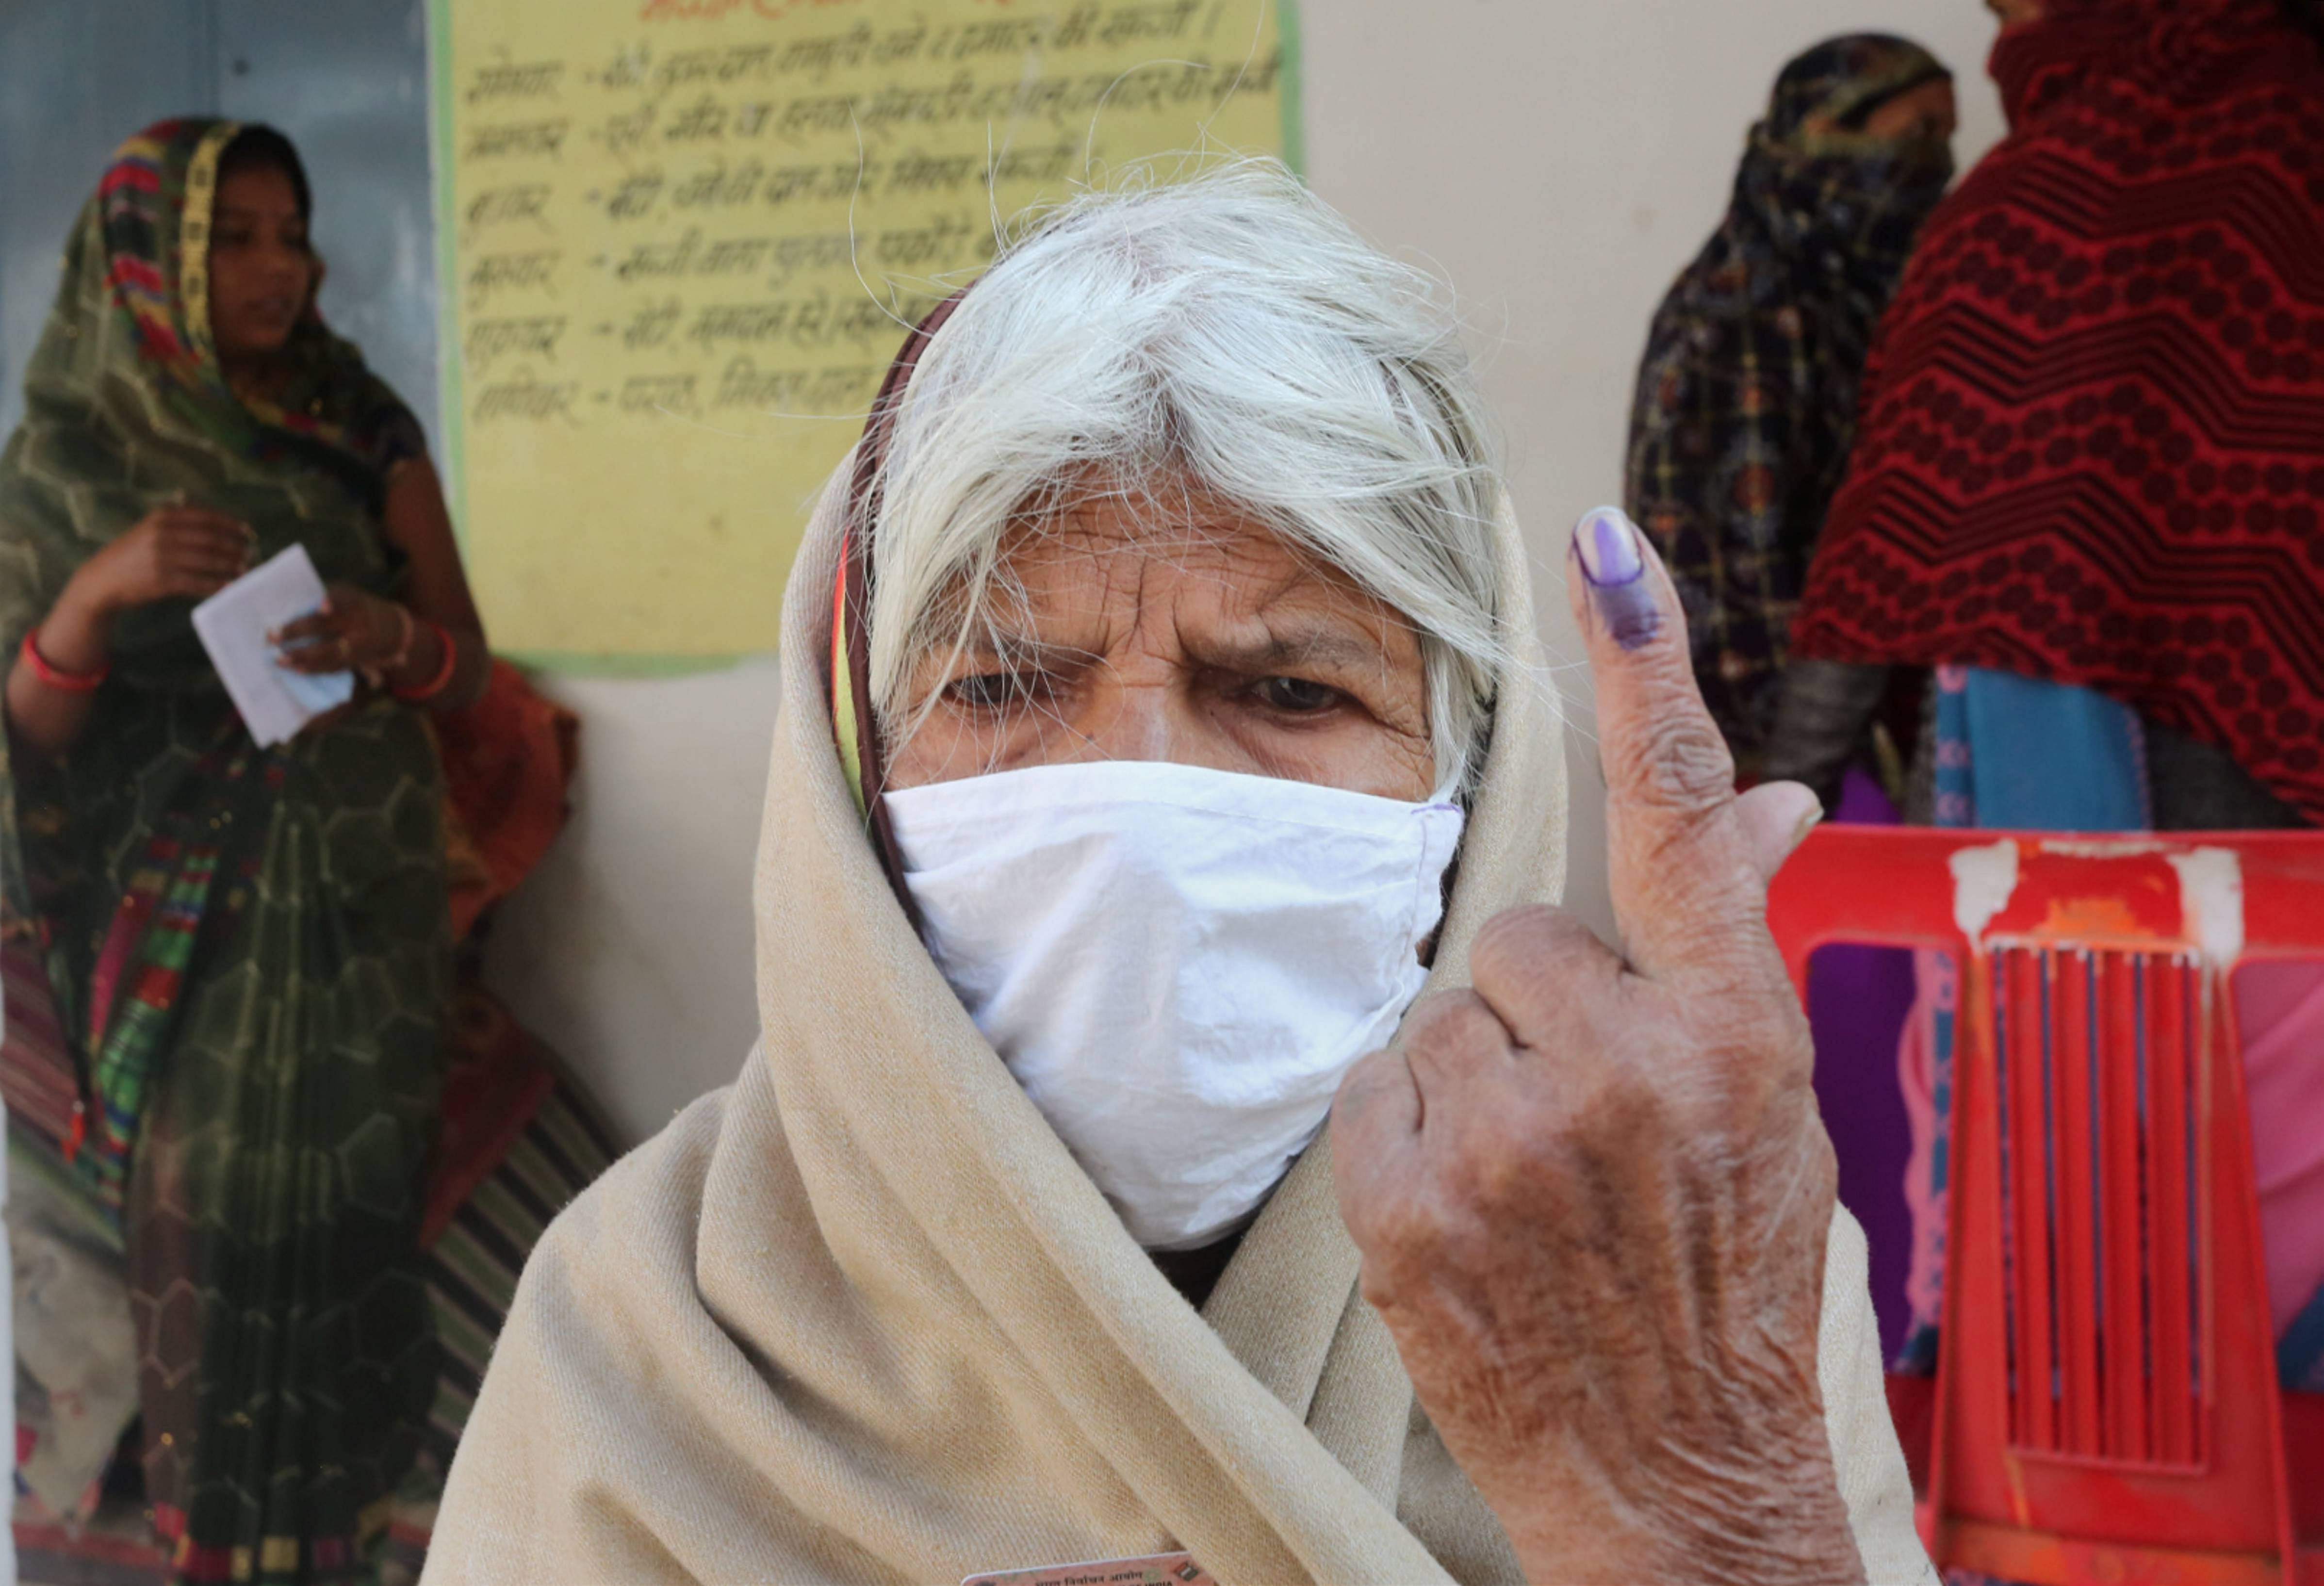 n elderly woman shows her finger marked with indelible ink after casting vote during the Madhya Pradesh Assembly bypolls, amid the ongoing coronavirus pandemic, in Raisen district, Tuesday, Nov. 3, 2020. Credit: PTI Photo